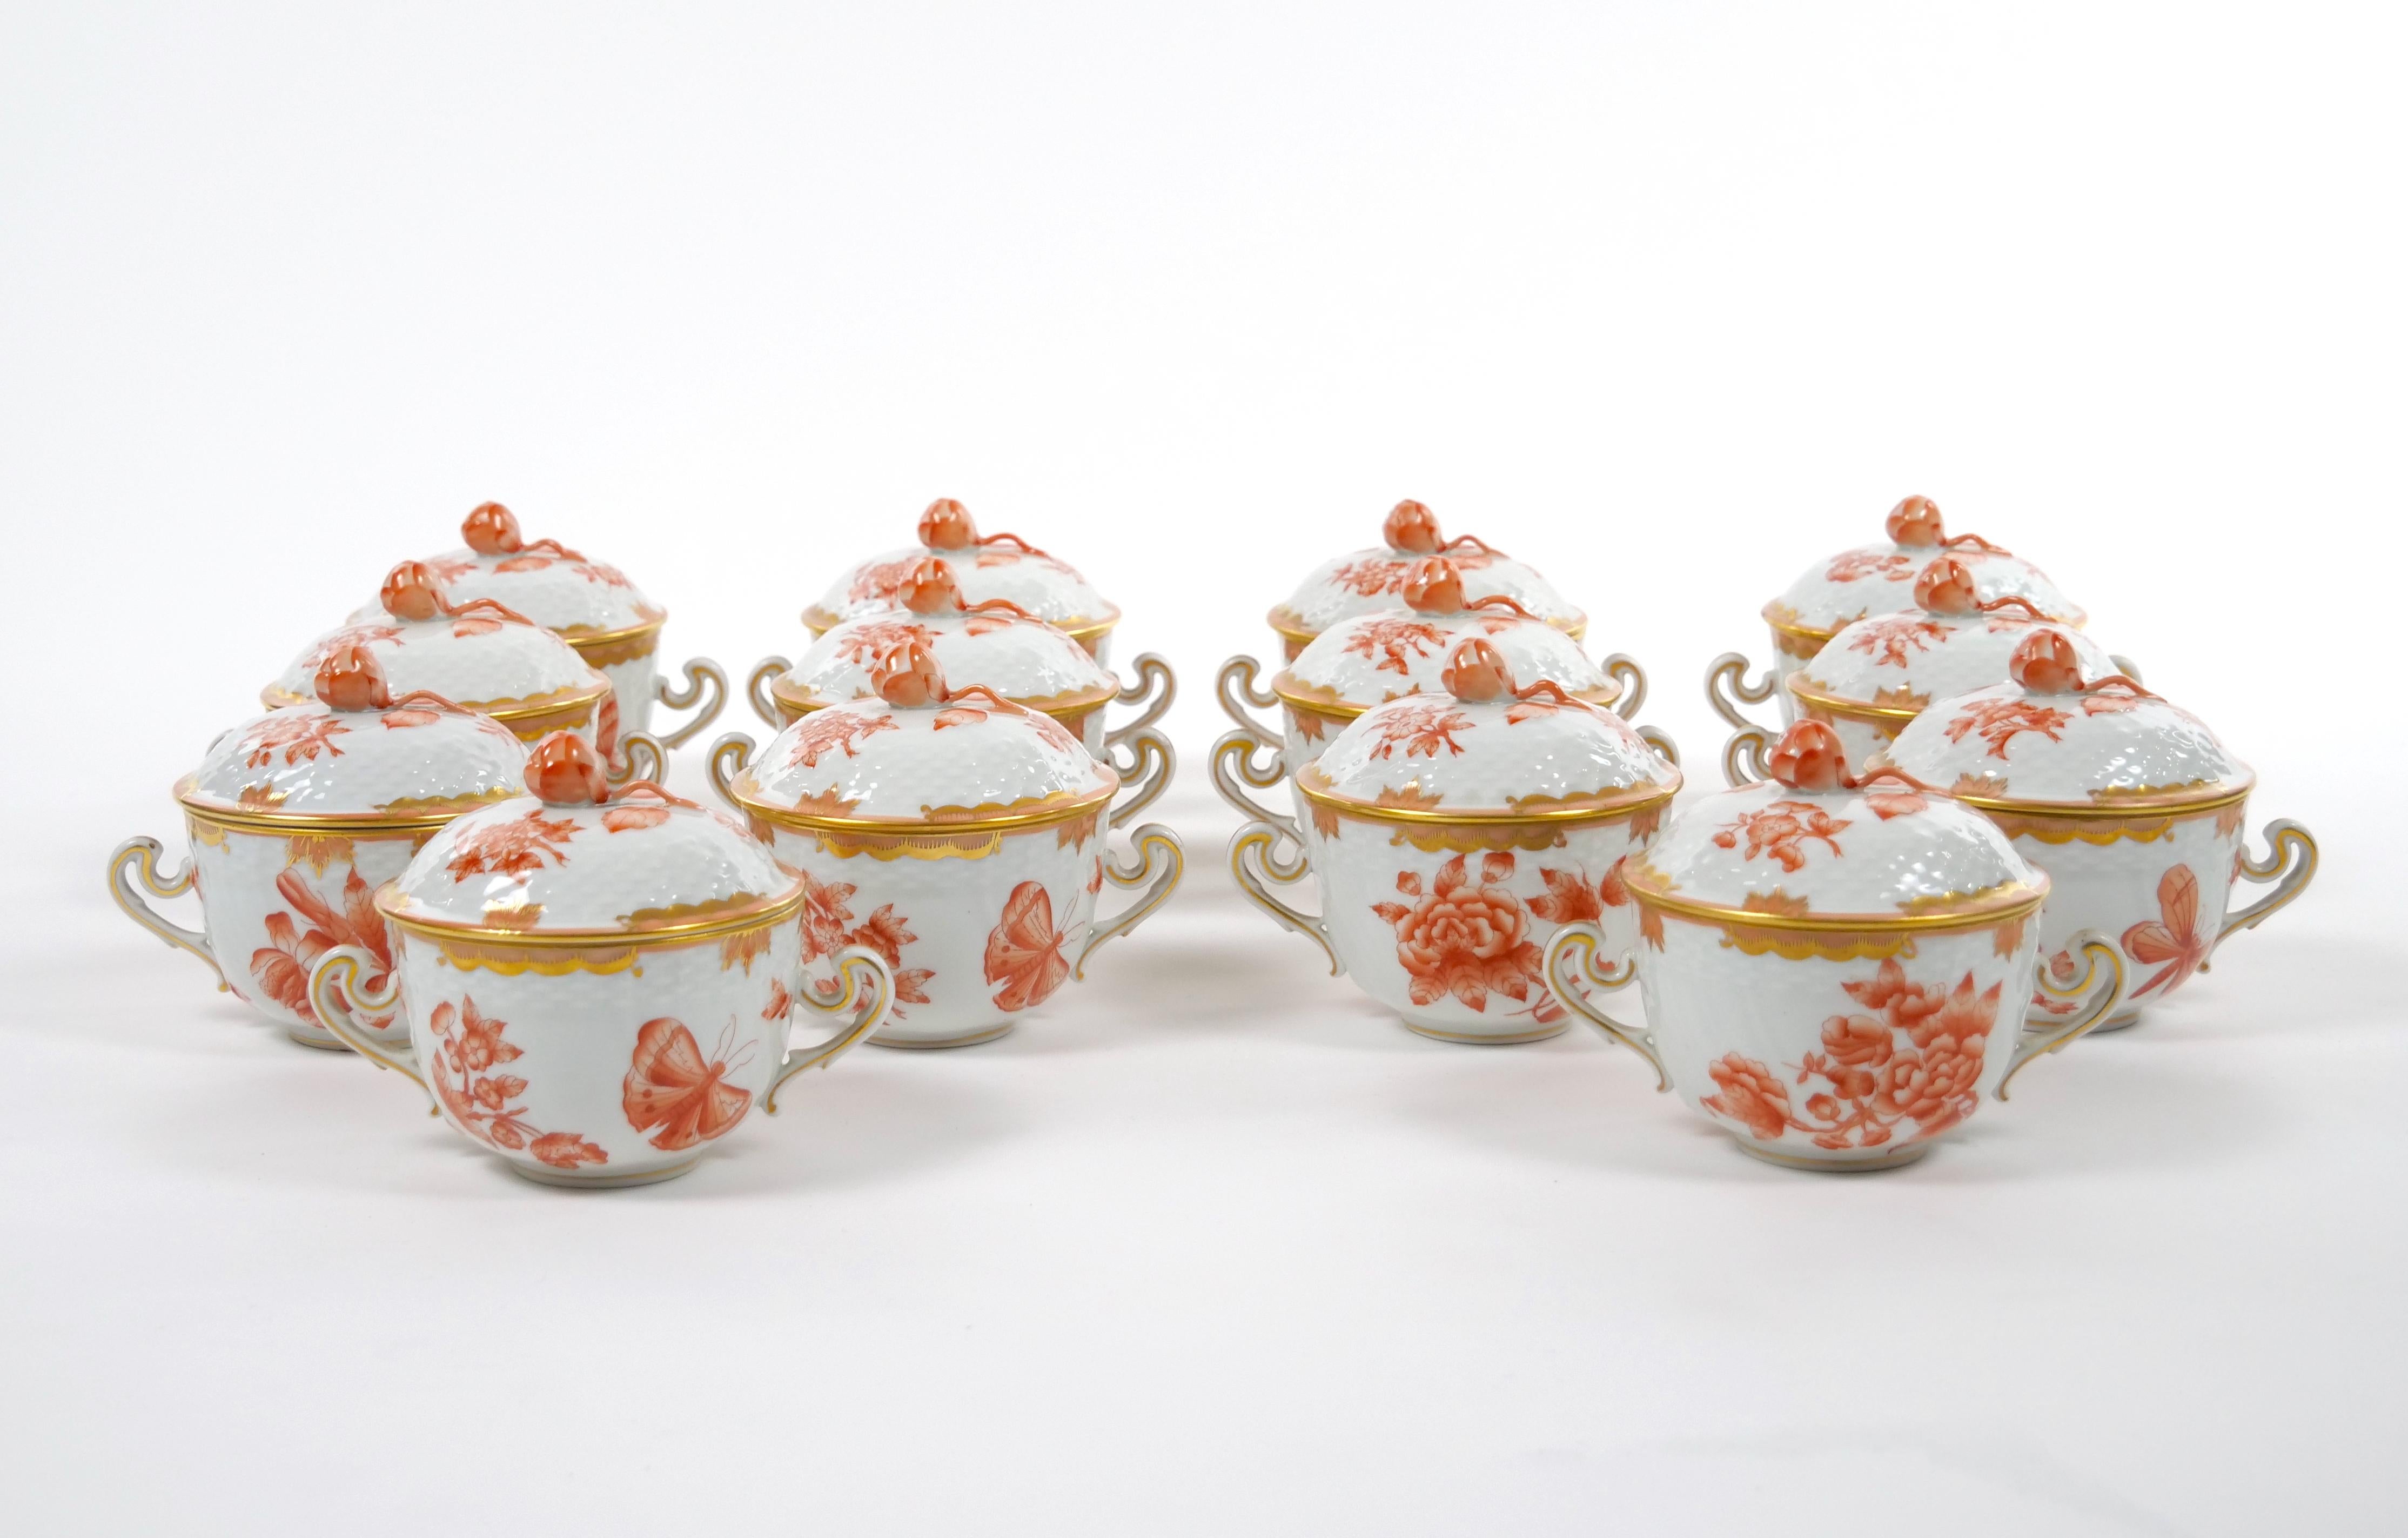 Herend Hungarian Porcelain Covered Pot De Creme Service / 12 People For Sale 4